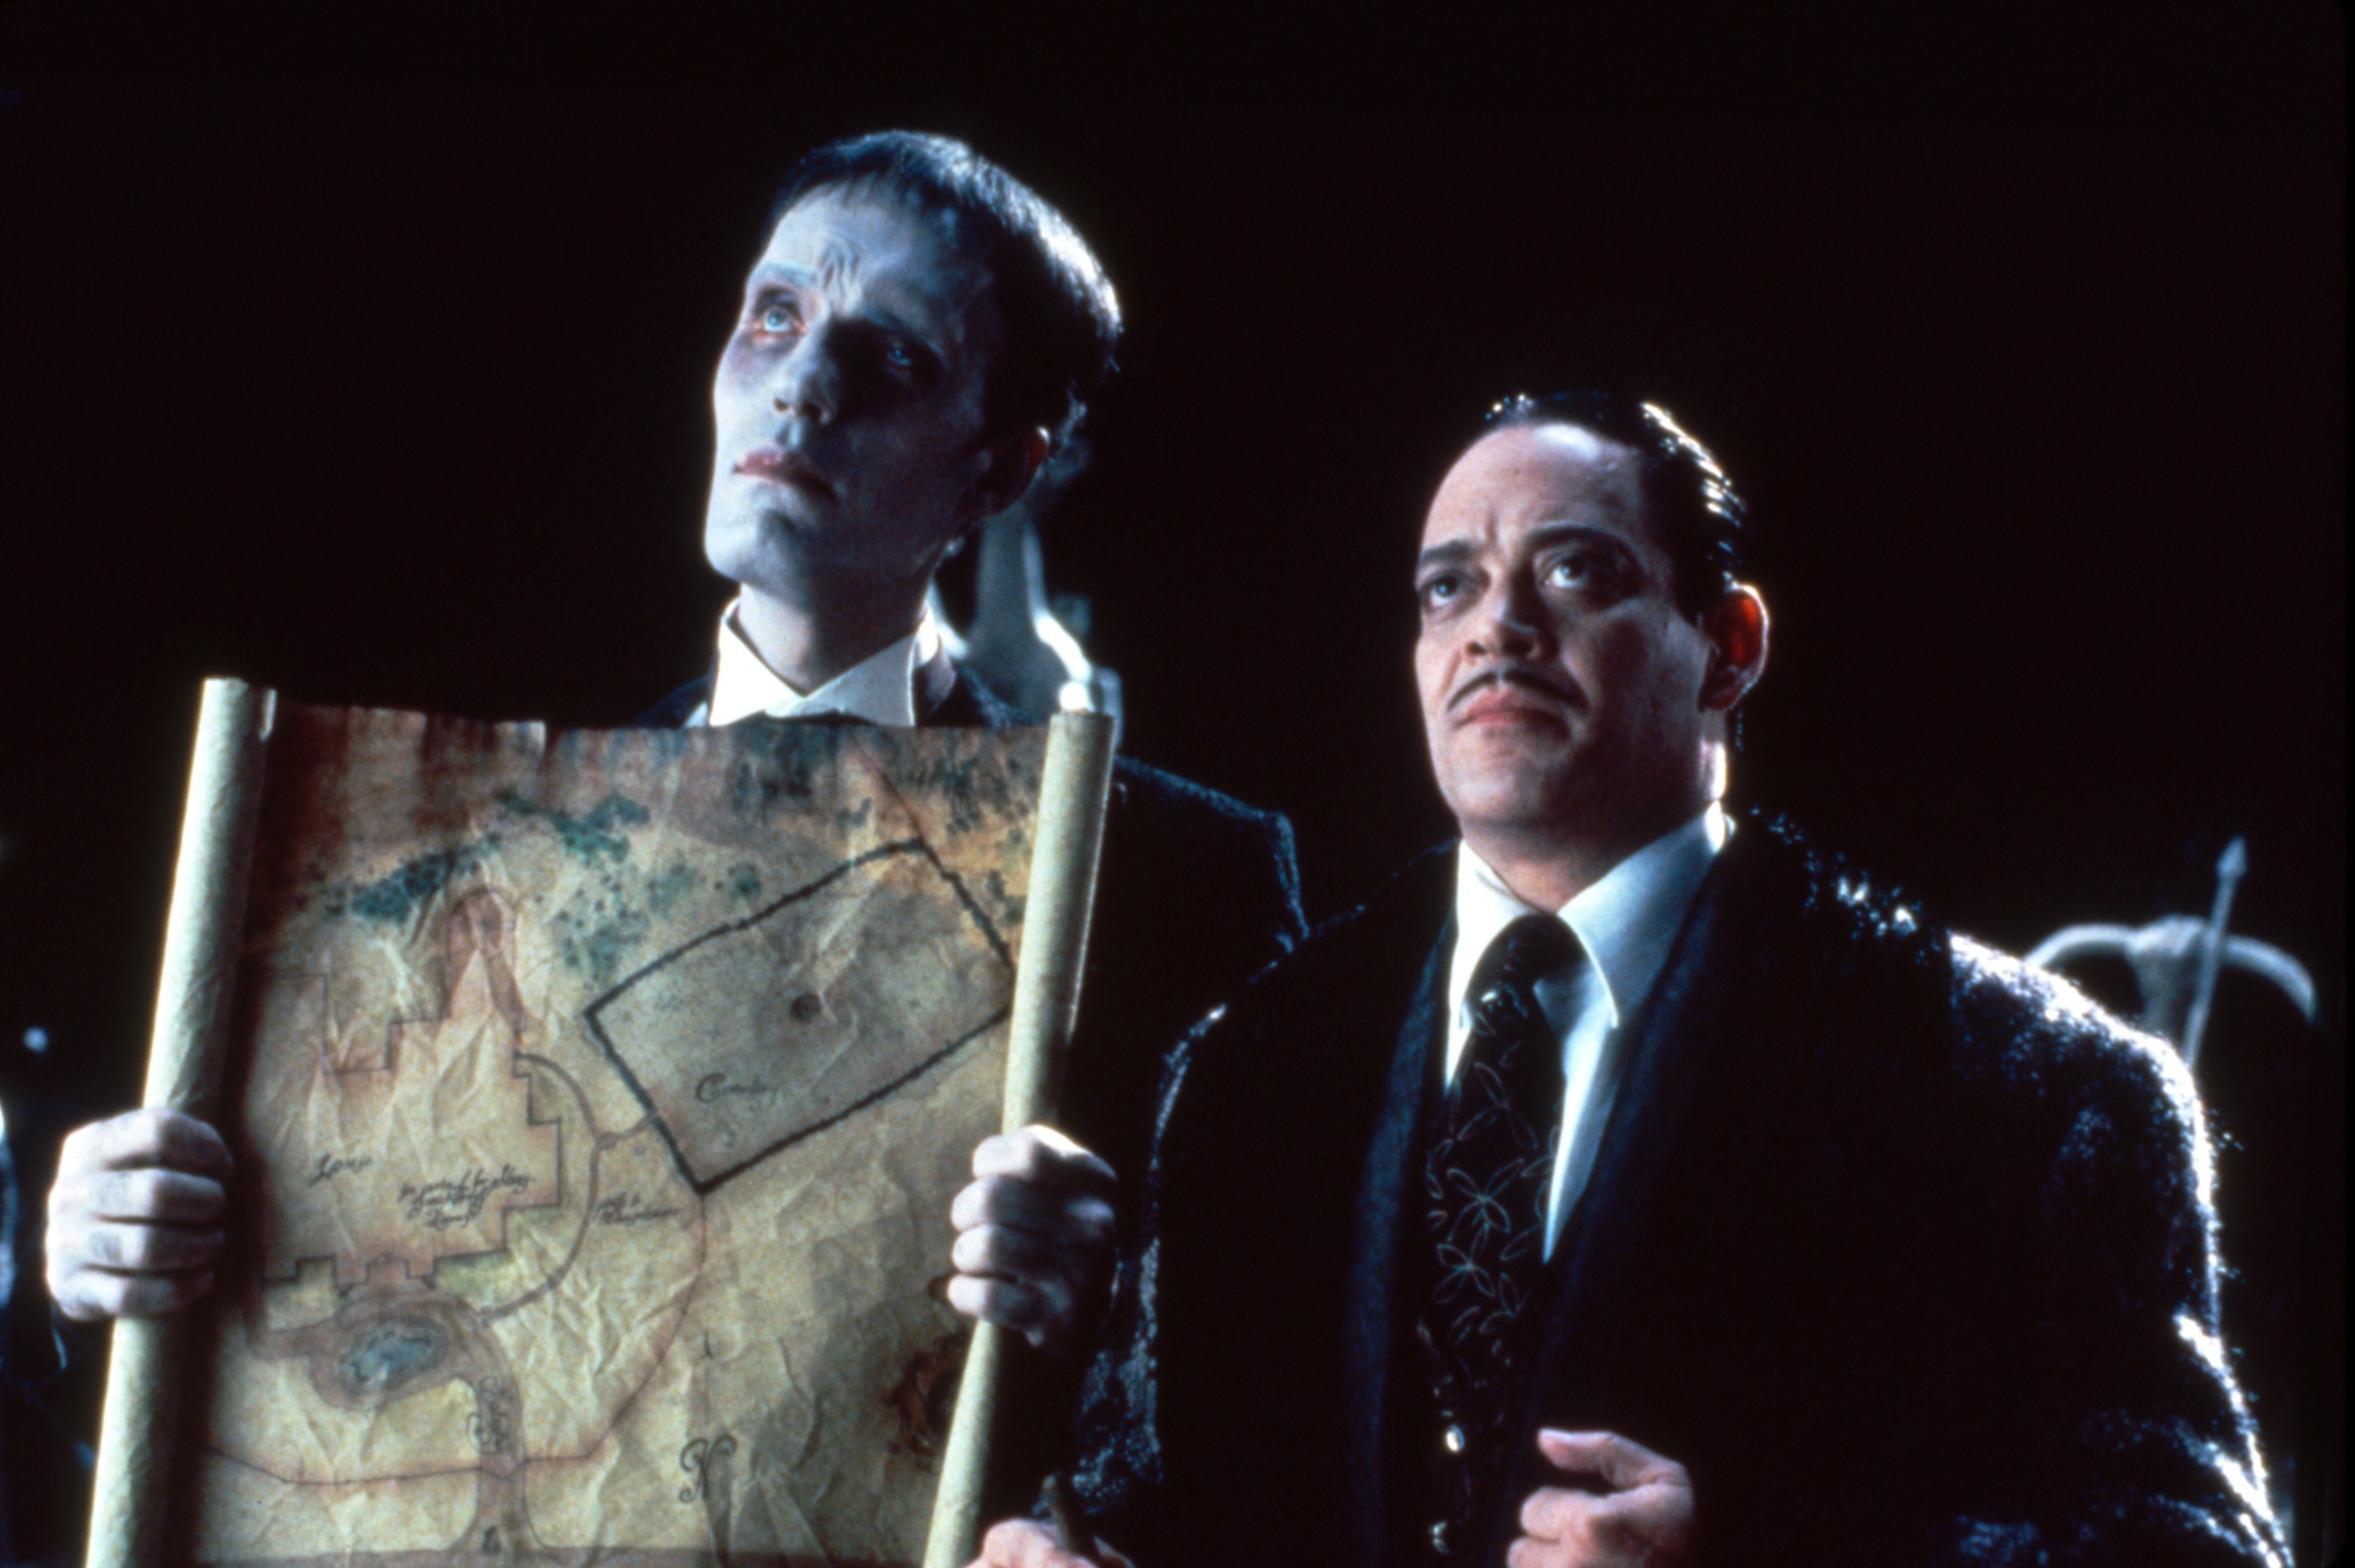 Carel Struycken and Raul Julia hold a map and look up